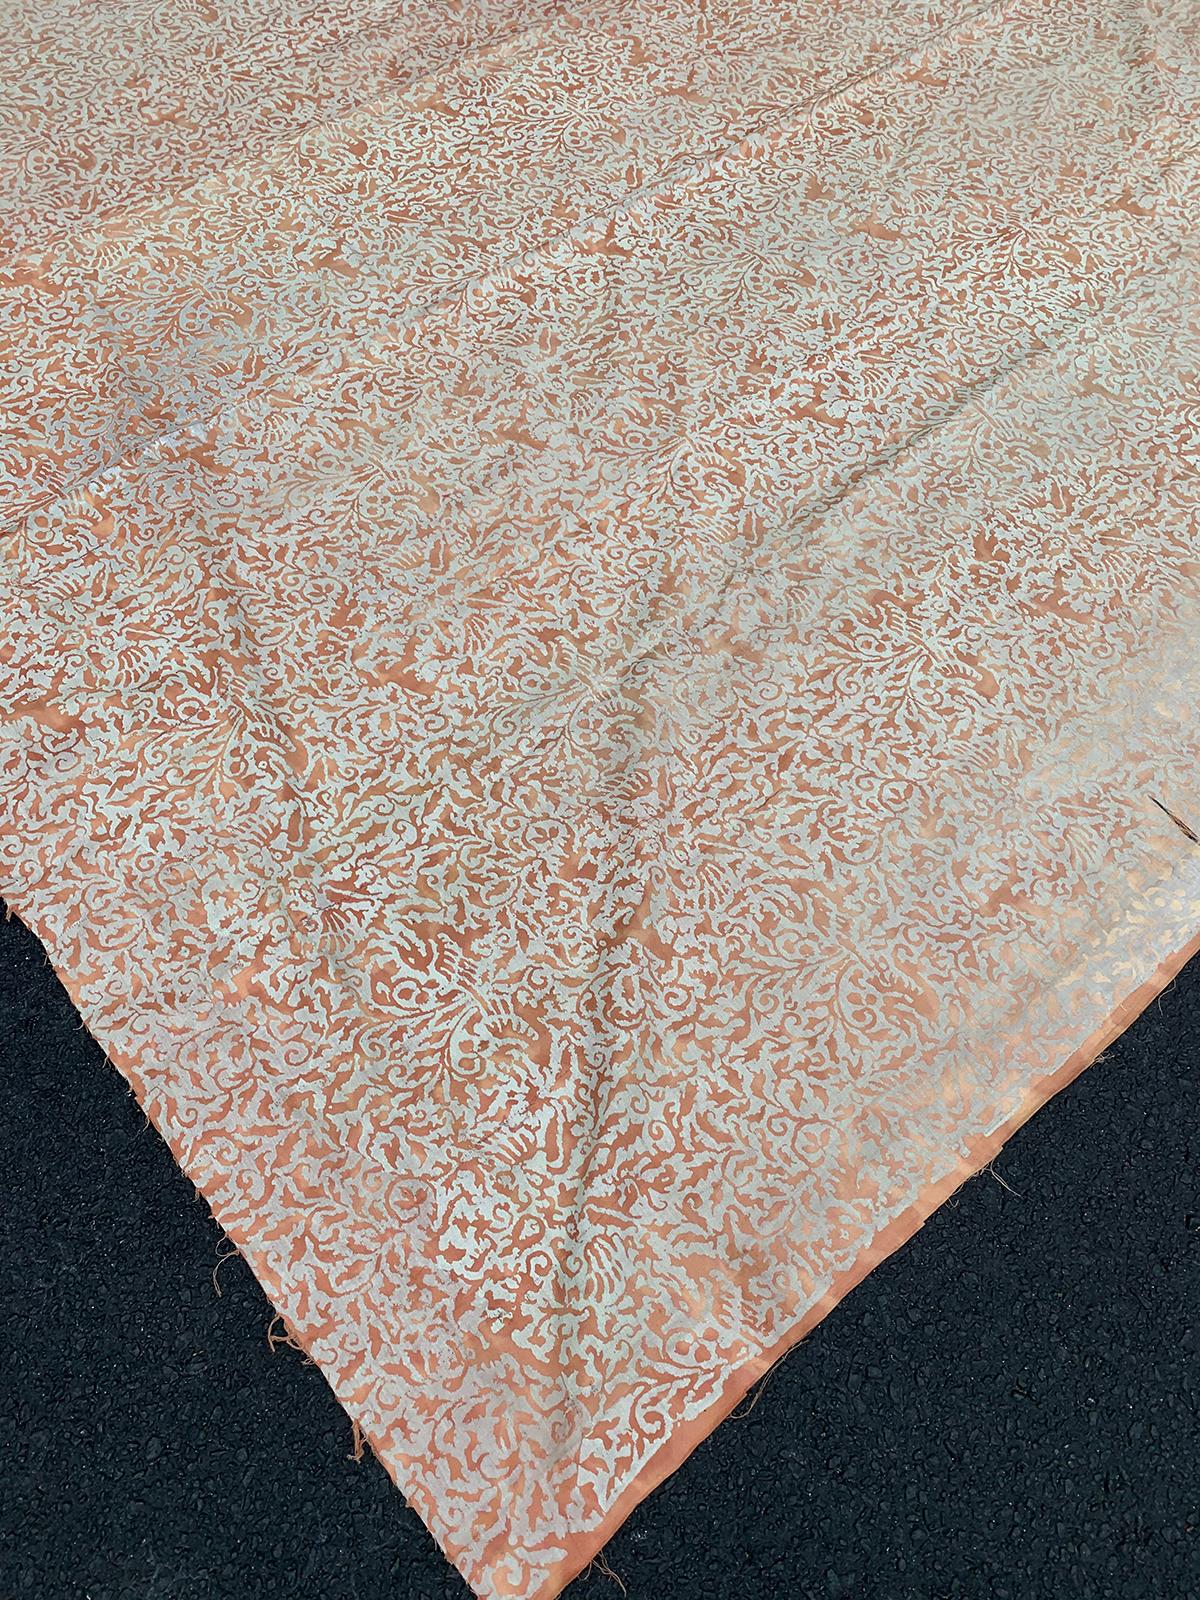 Pair of Mid-20th Century Fortuny Fabric Panels with Custom Seaming 5